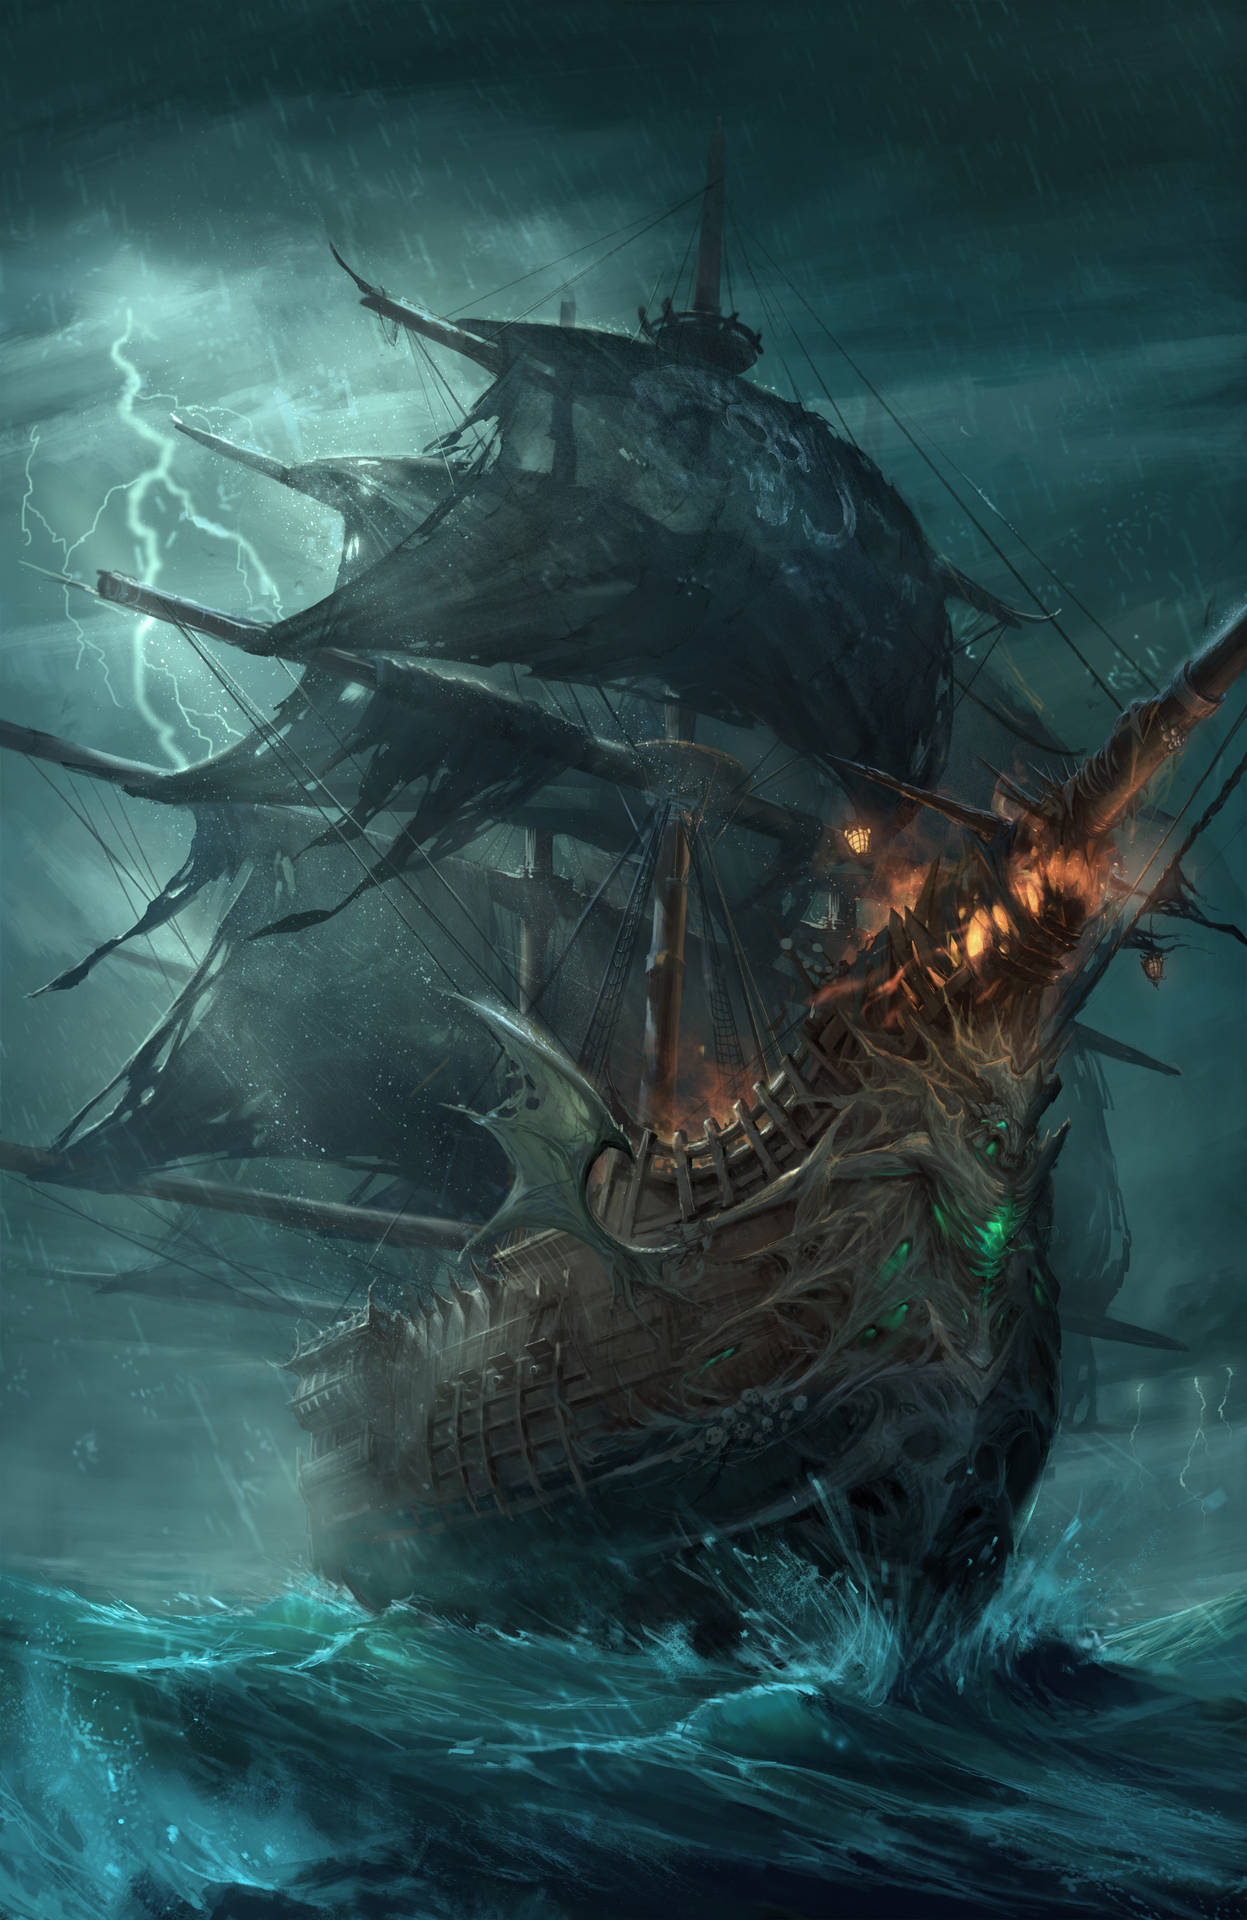 Cool Pirate Ghost Ship Wallpaper